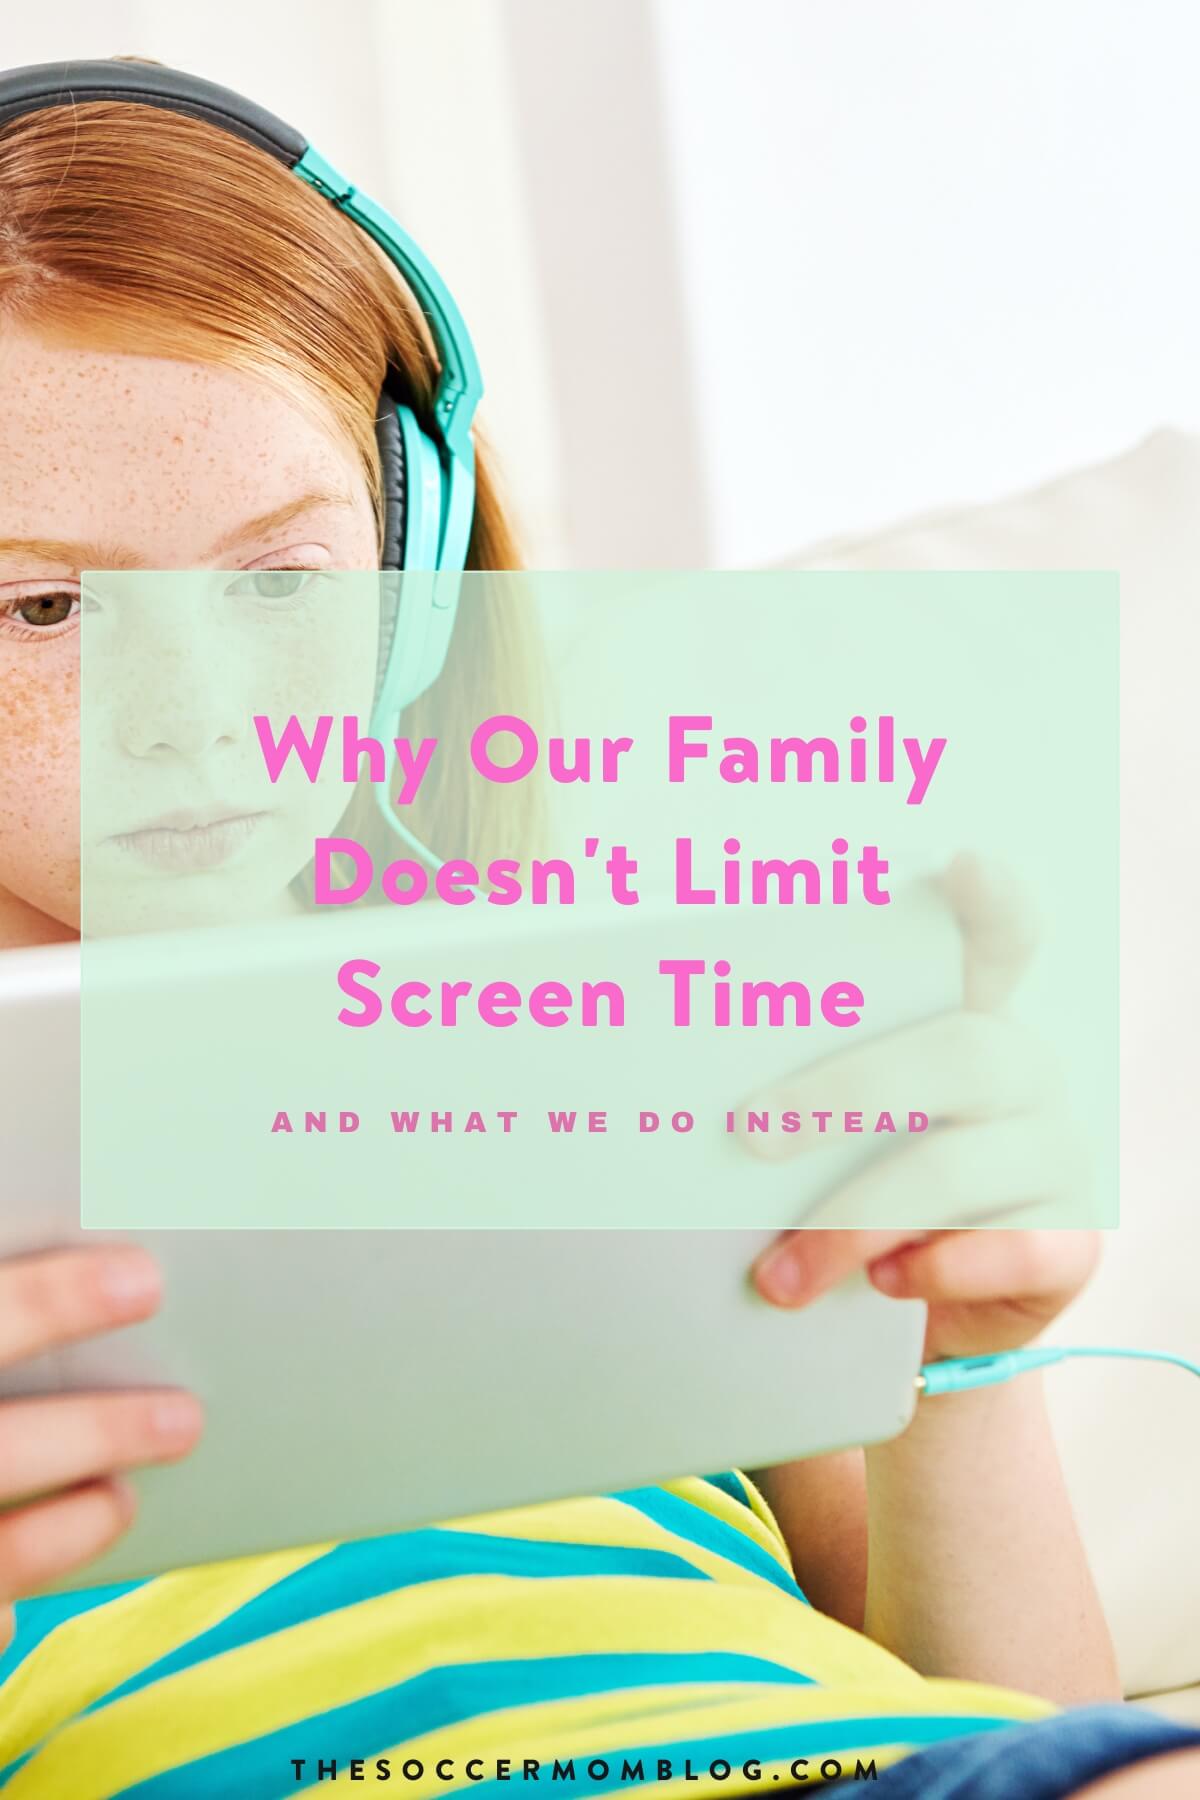 little girl with headphones on tablet; text overlay "Why Our Family Doesn't Limit Screen Time"